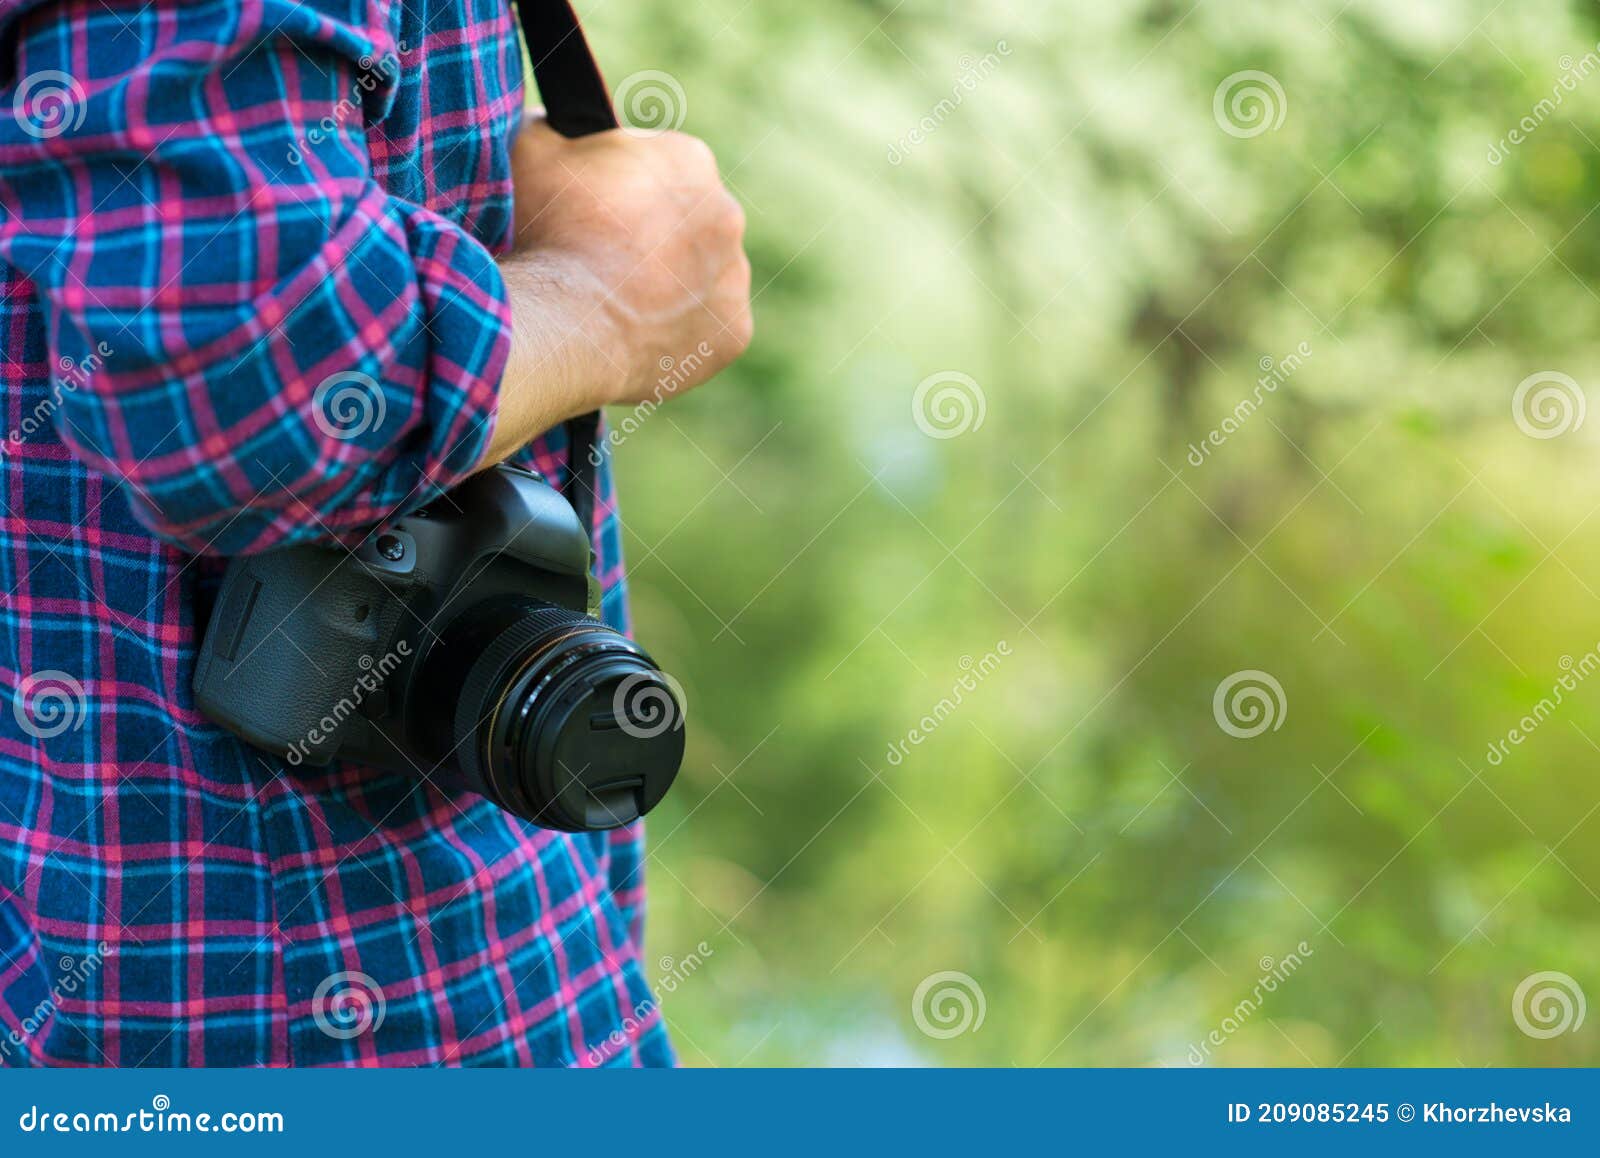 photographer or traveler concept. photographer holding digital camera in his hands with copy space